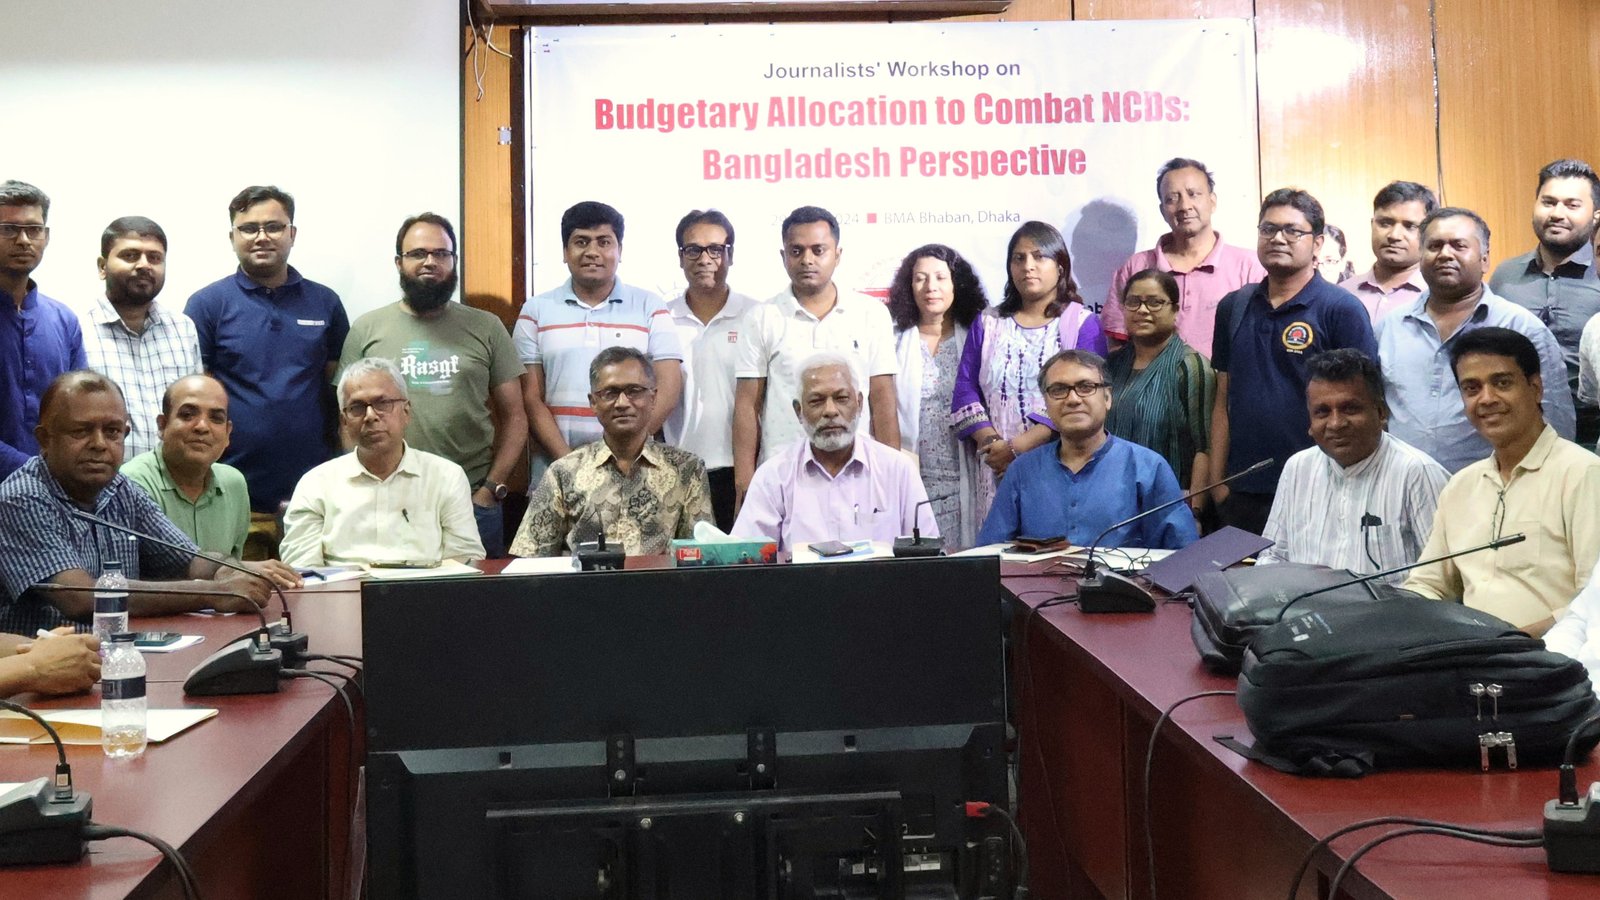 70% of deaths from NCDs, increased budgetary allocation demanded: Speakers at journalists' workshop